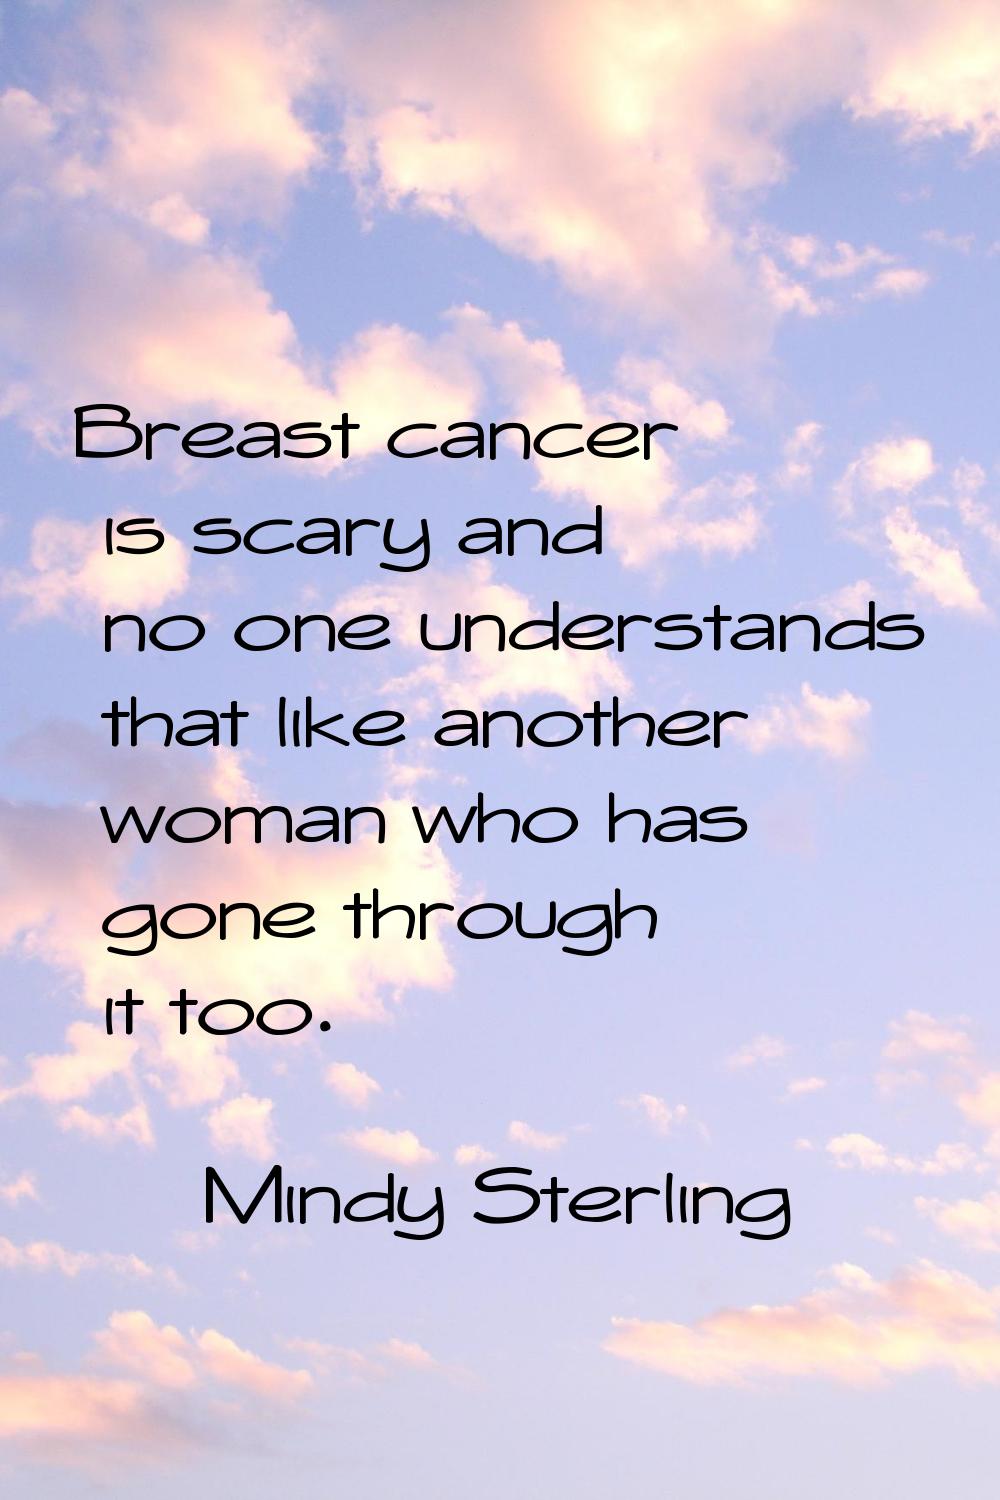 Breast cancer is scary and no one understands that like another woman who has gone through it too.